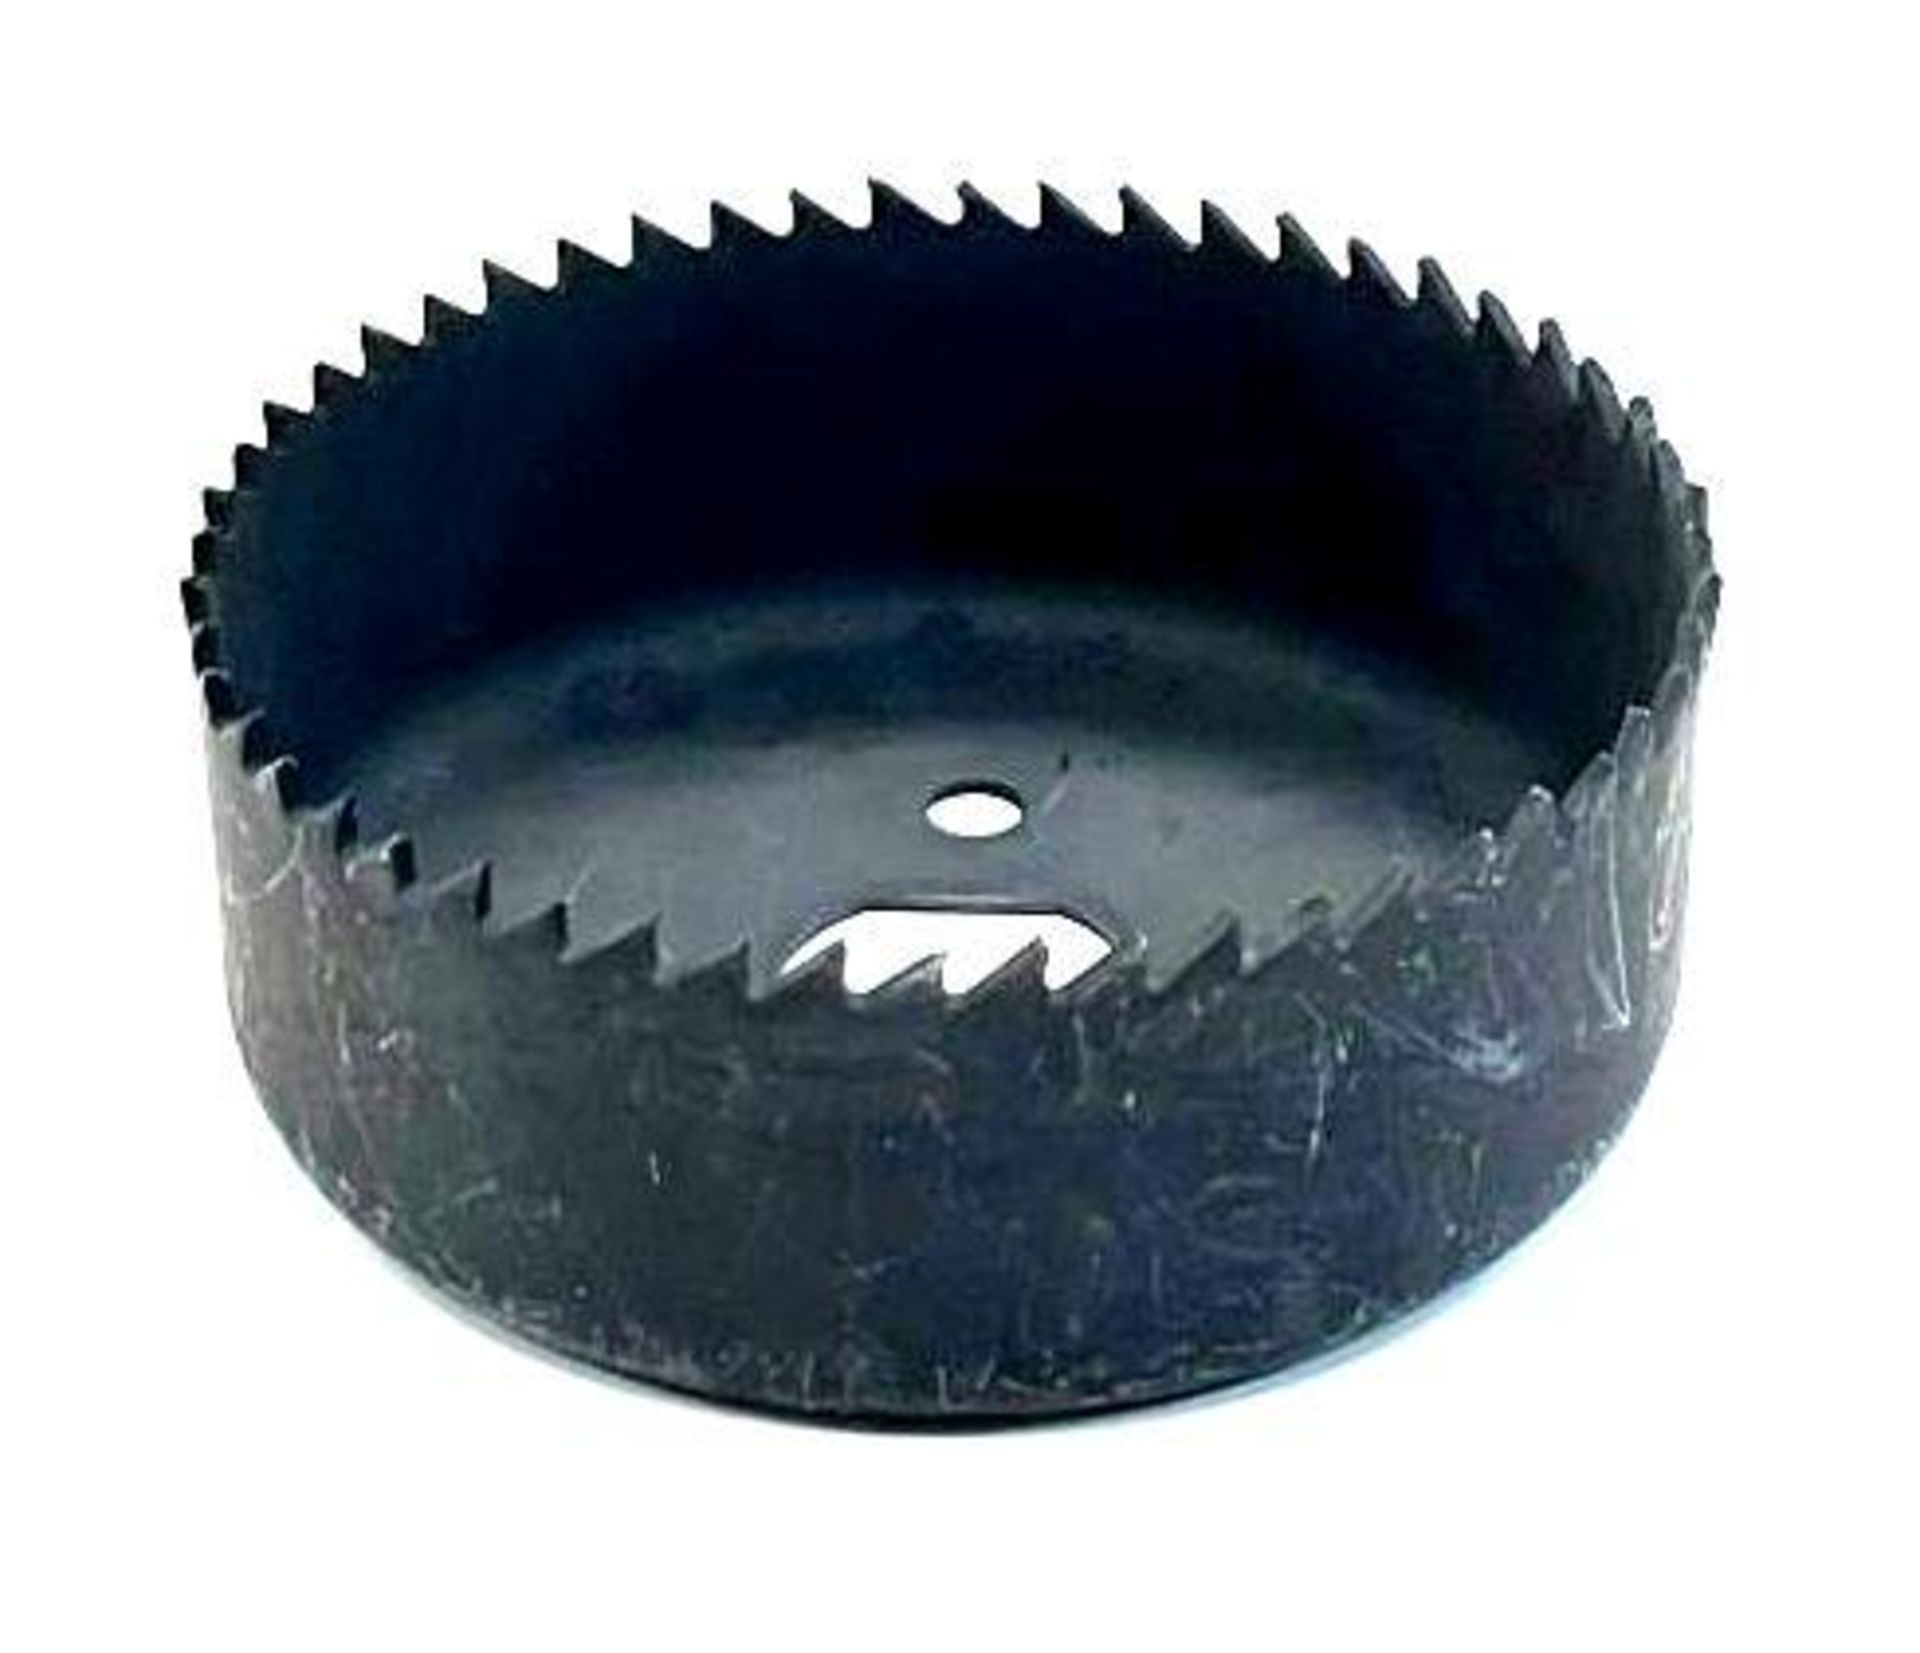 DESCRIPTION (300) 2-7/8" CARBON STEEL TREATED HOLE SAWS 150 PER CASE, 300 IN LOT BRAND/MODEL EAZYPOW